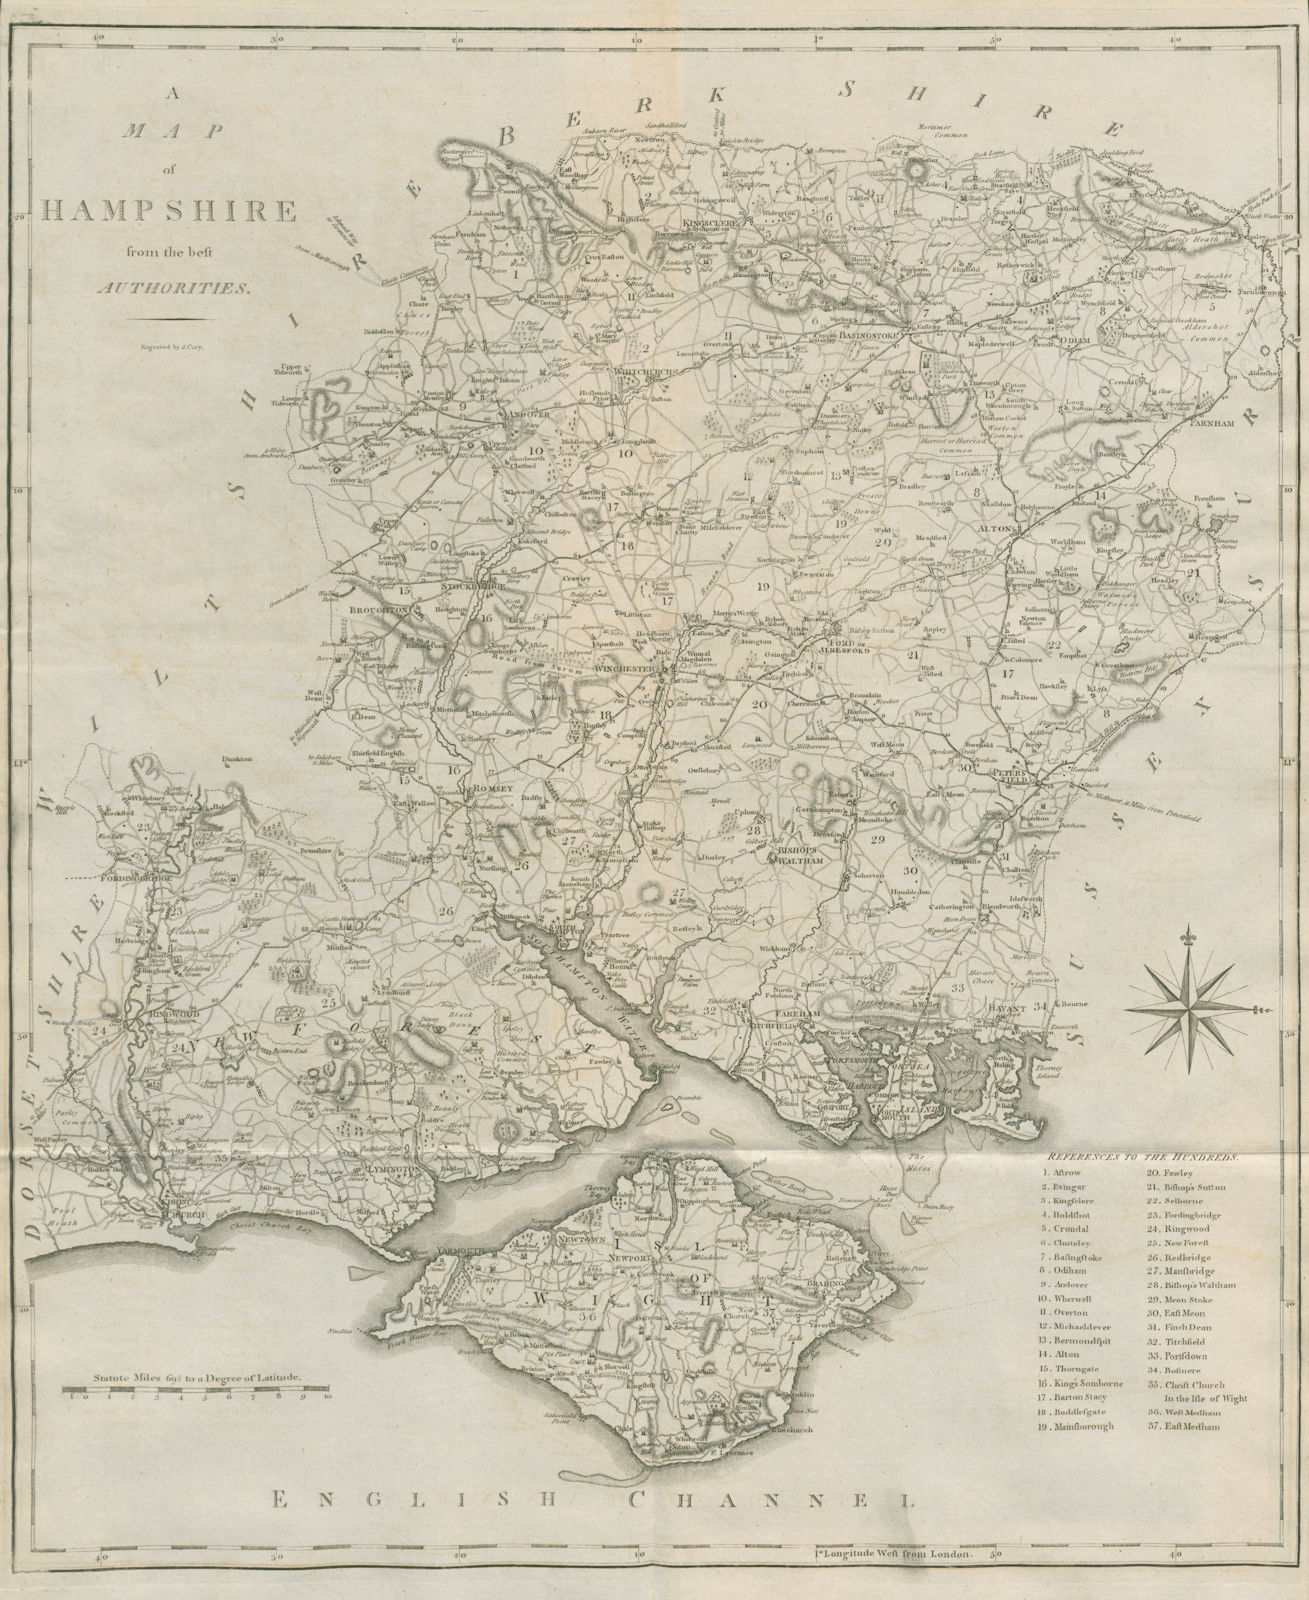 "A map of Hampshire from the best authorities". County map. CARY 1789 old